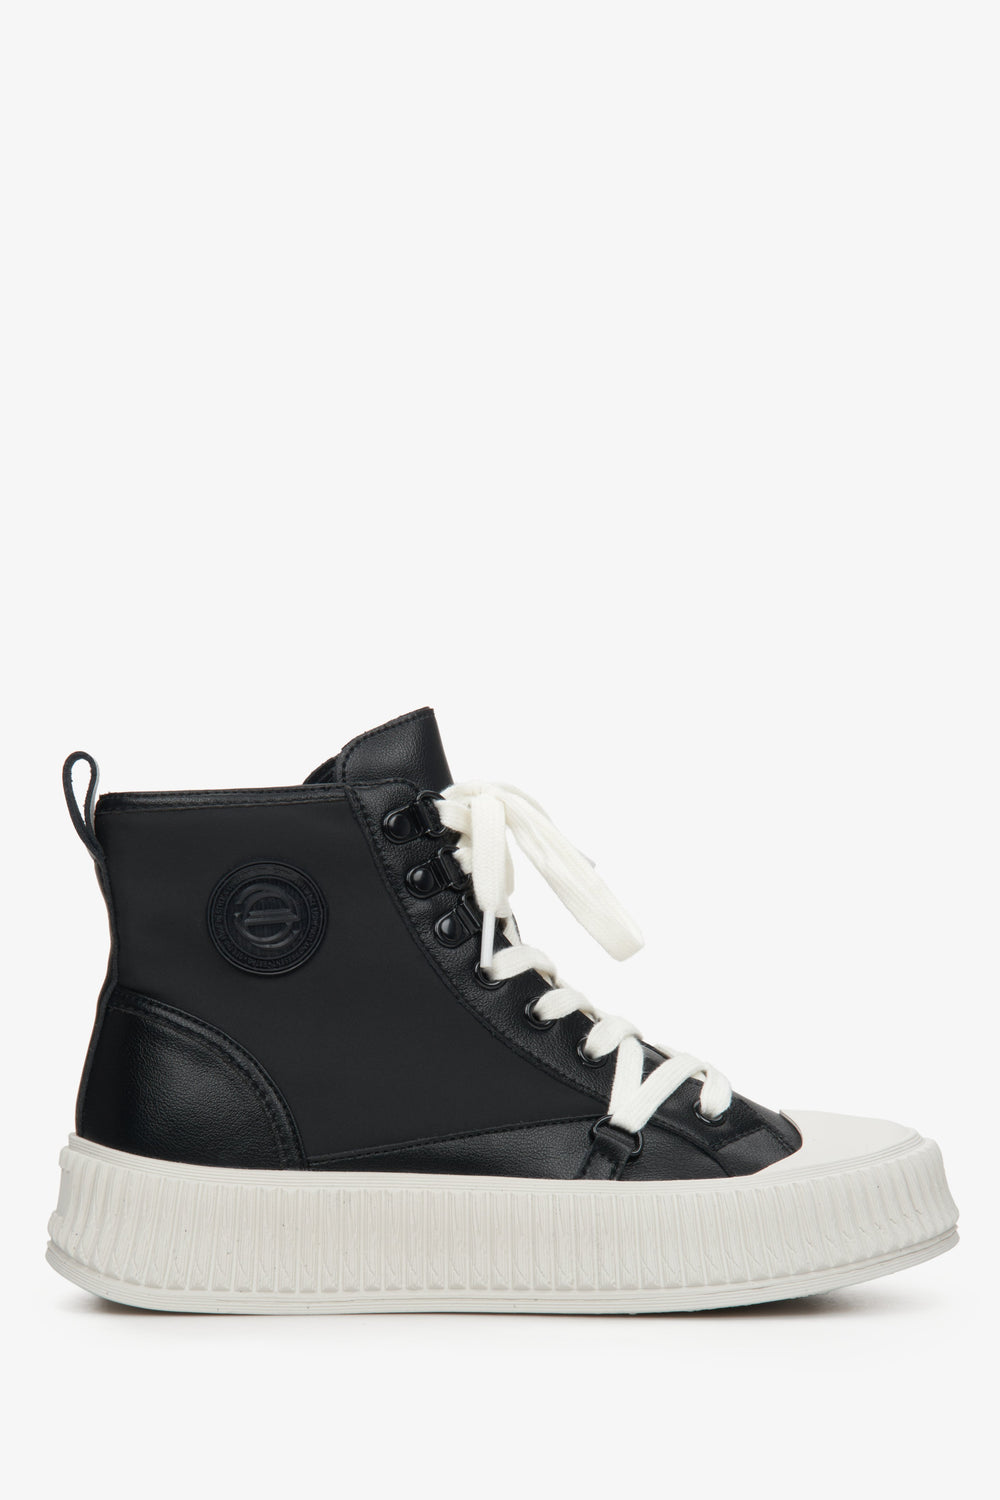 Women's Black High-Top Sneakers made of Genuine Leather Estro ER00112710.